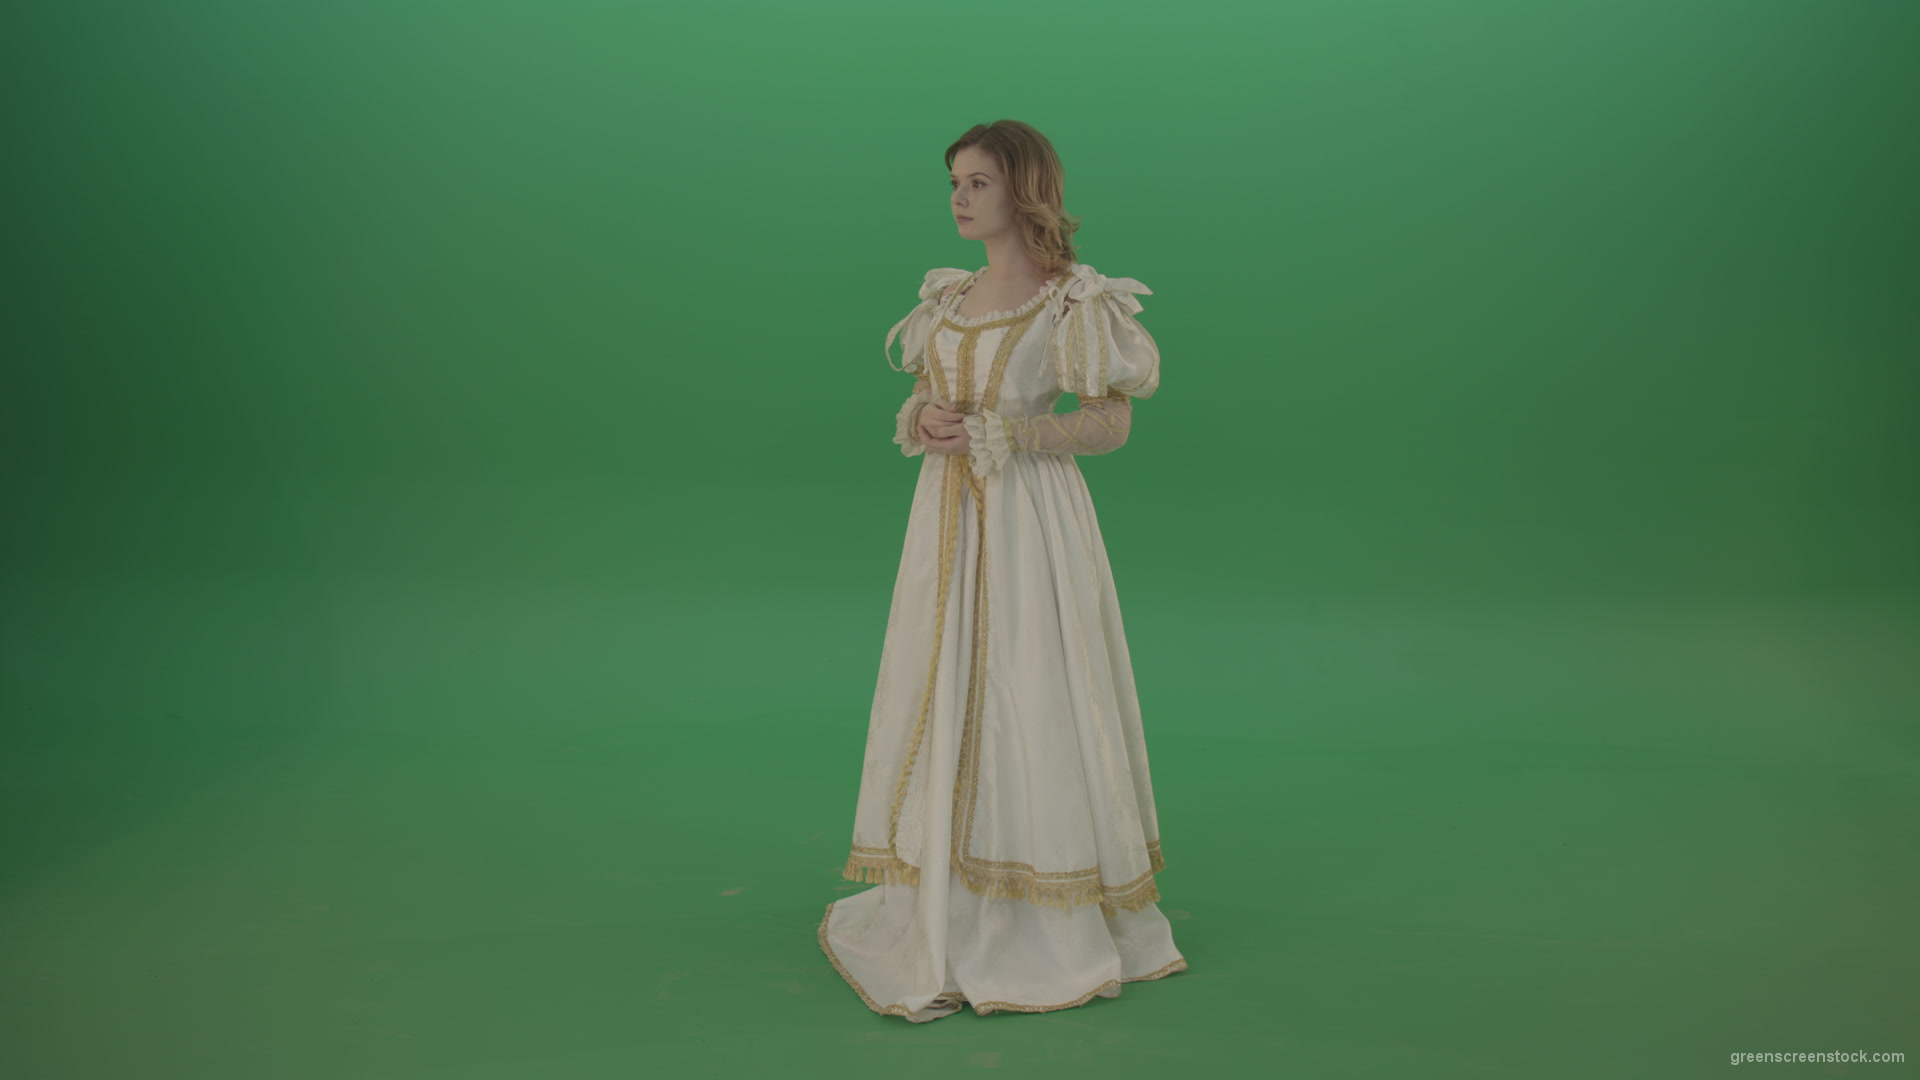 Flips-the-touchscreen-princess-in-a-white-dress-isolated-on-green-screen_001 Green Screen Stock